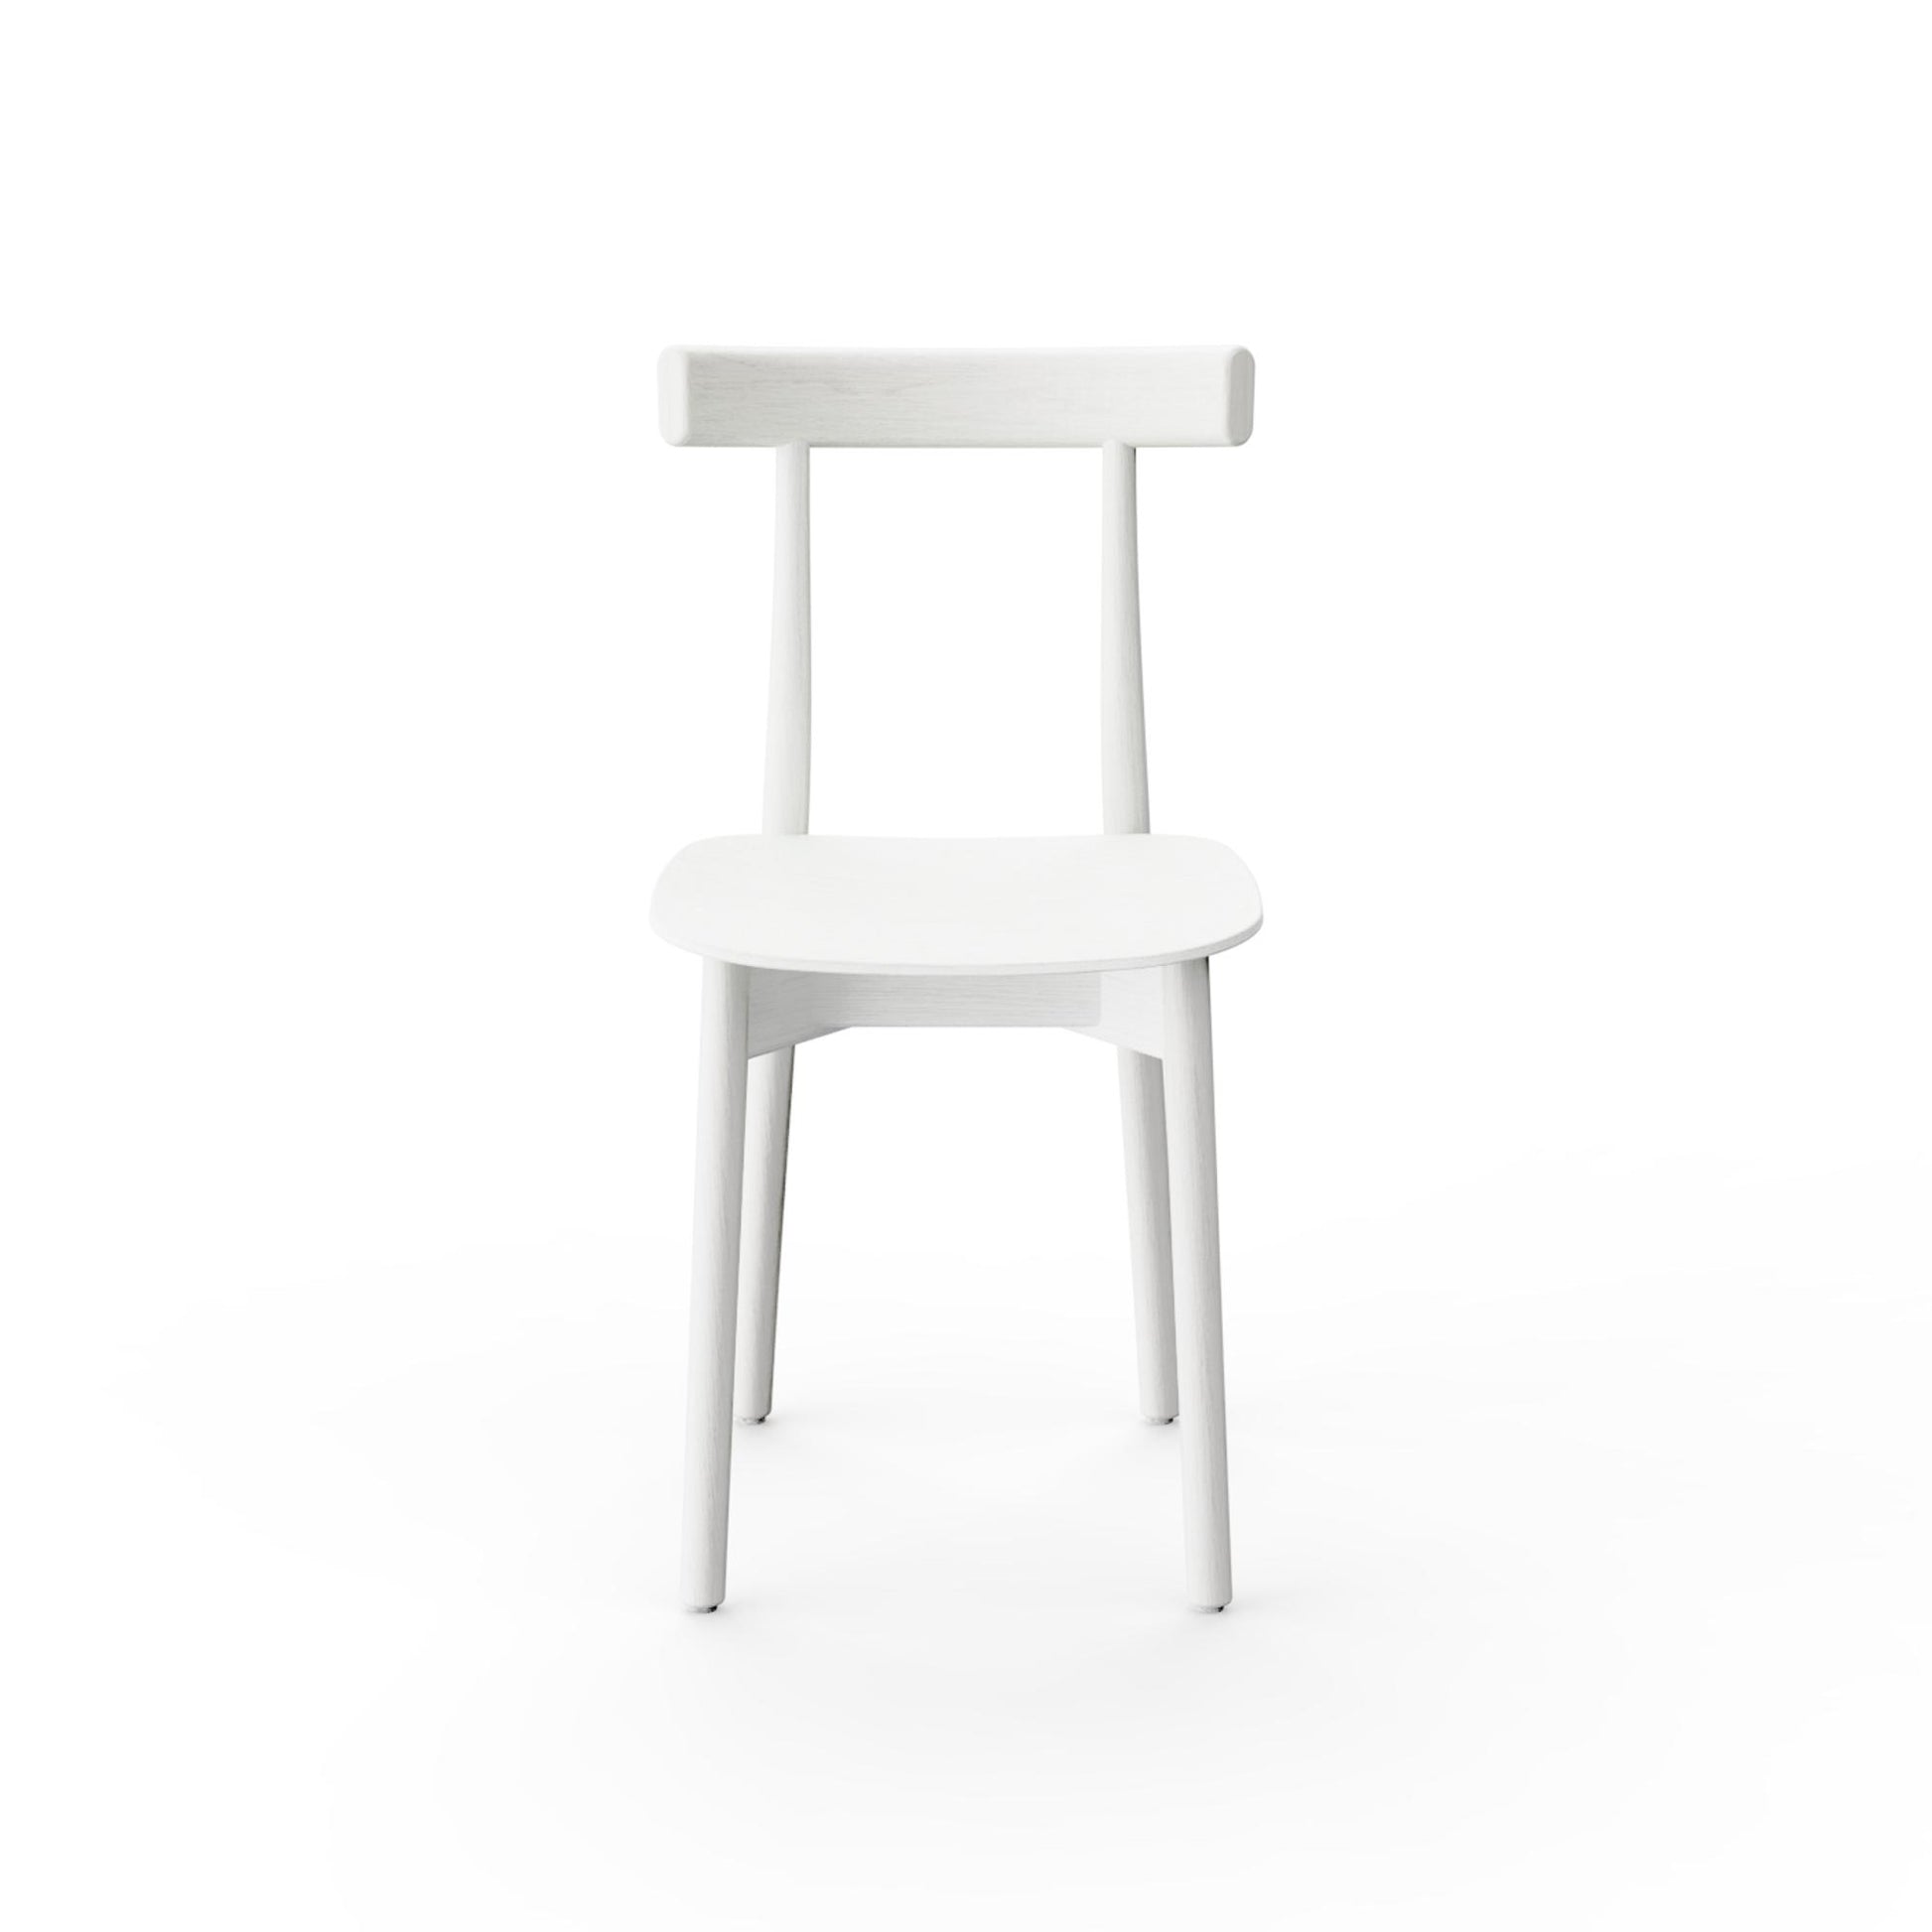 Skinny Wooden Dining Chair by NINE #White/ Ash